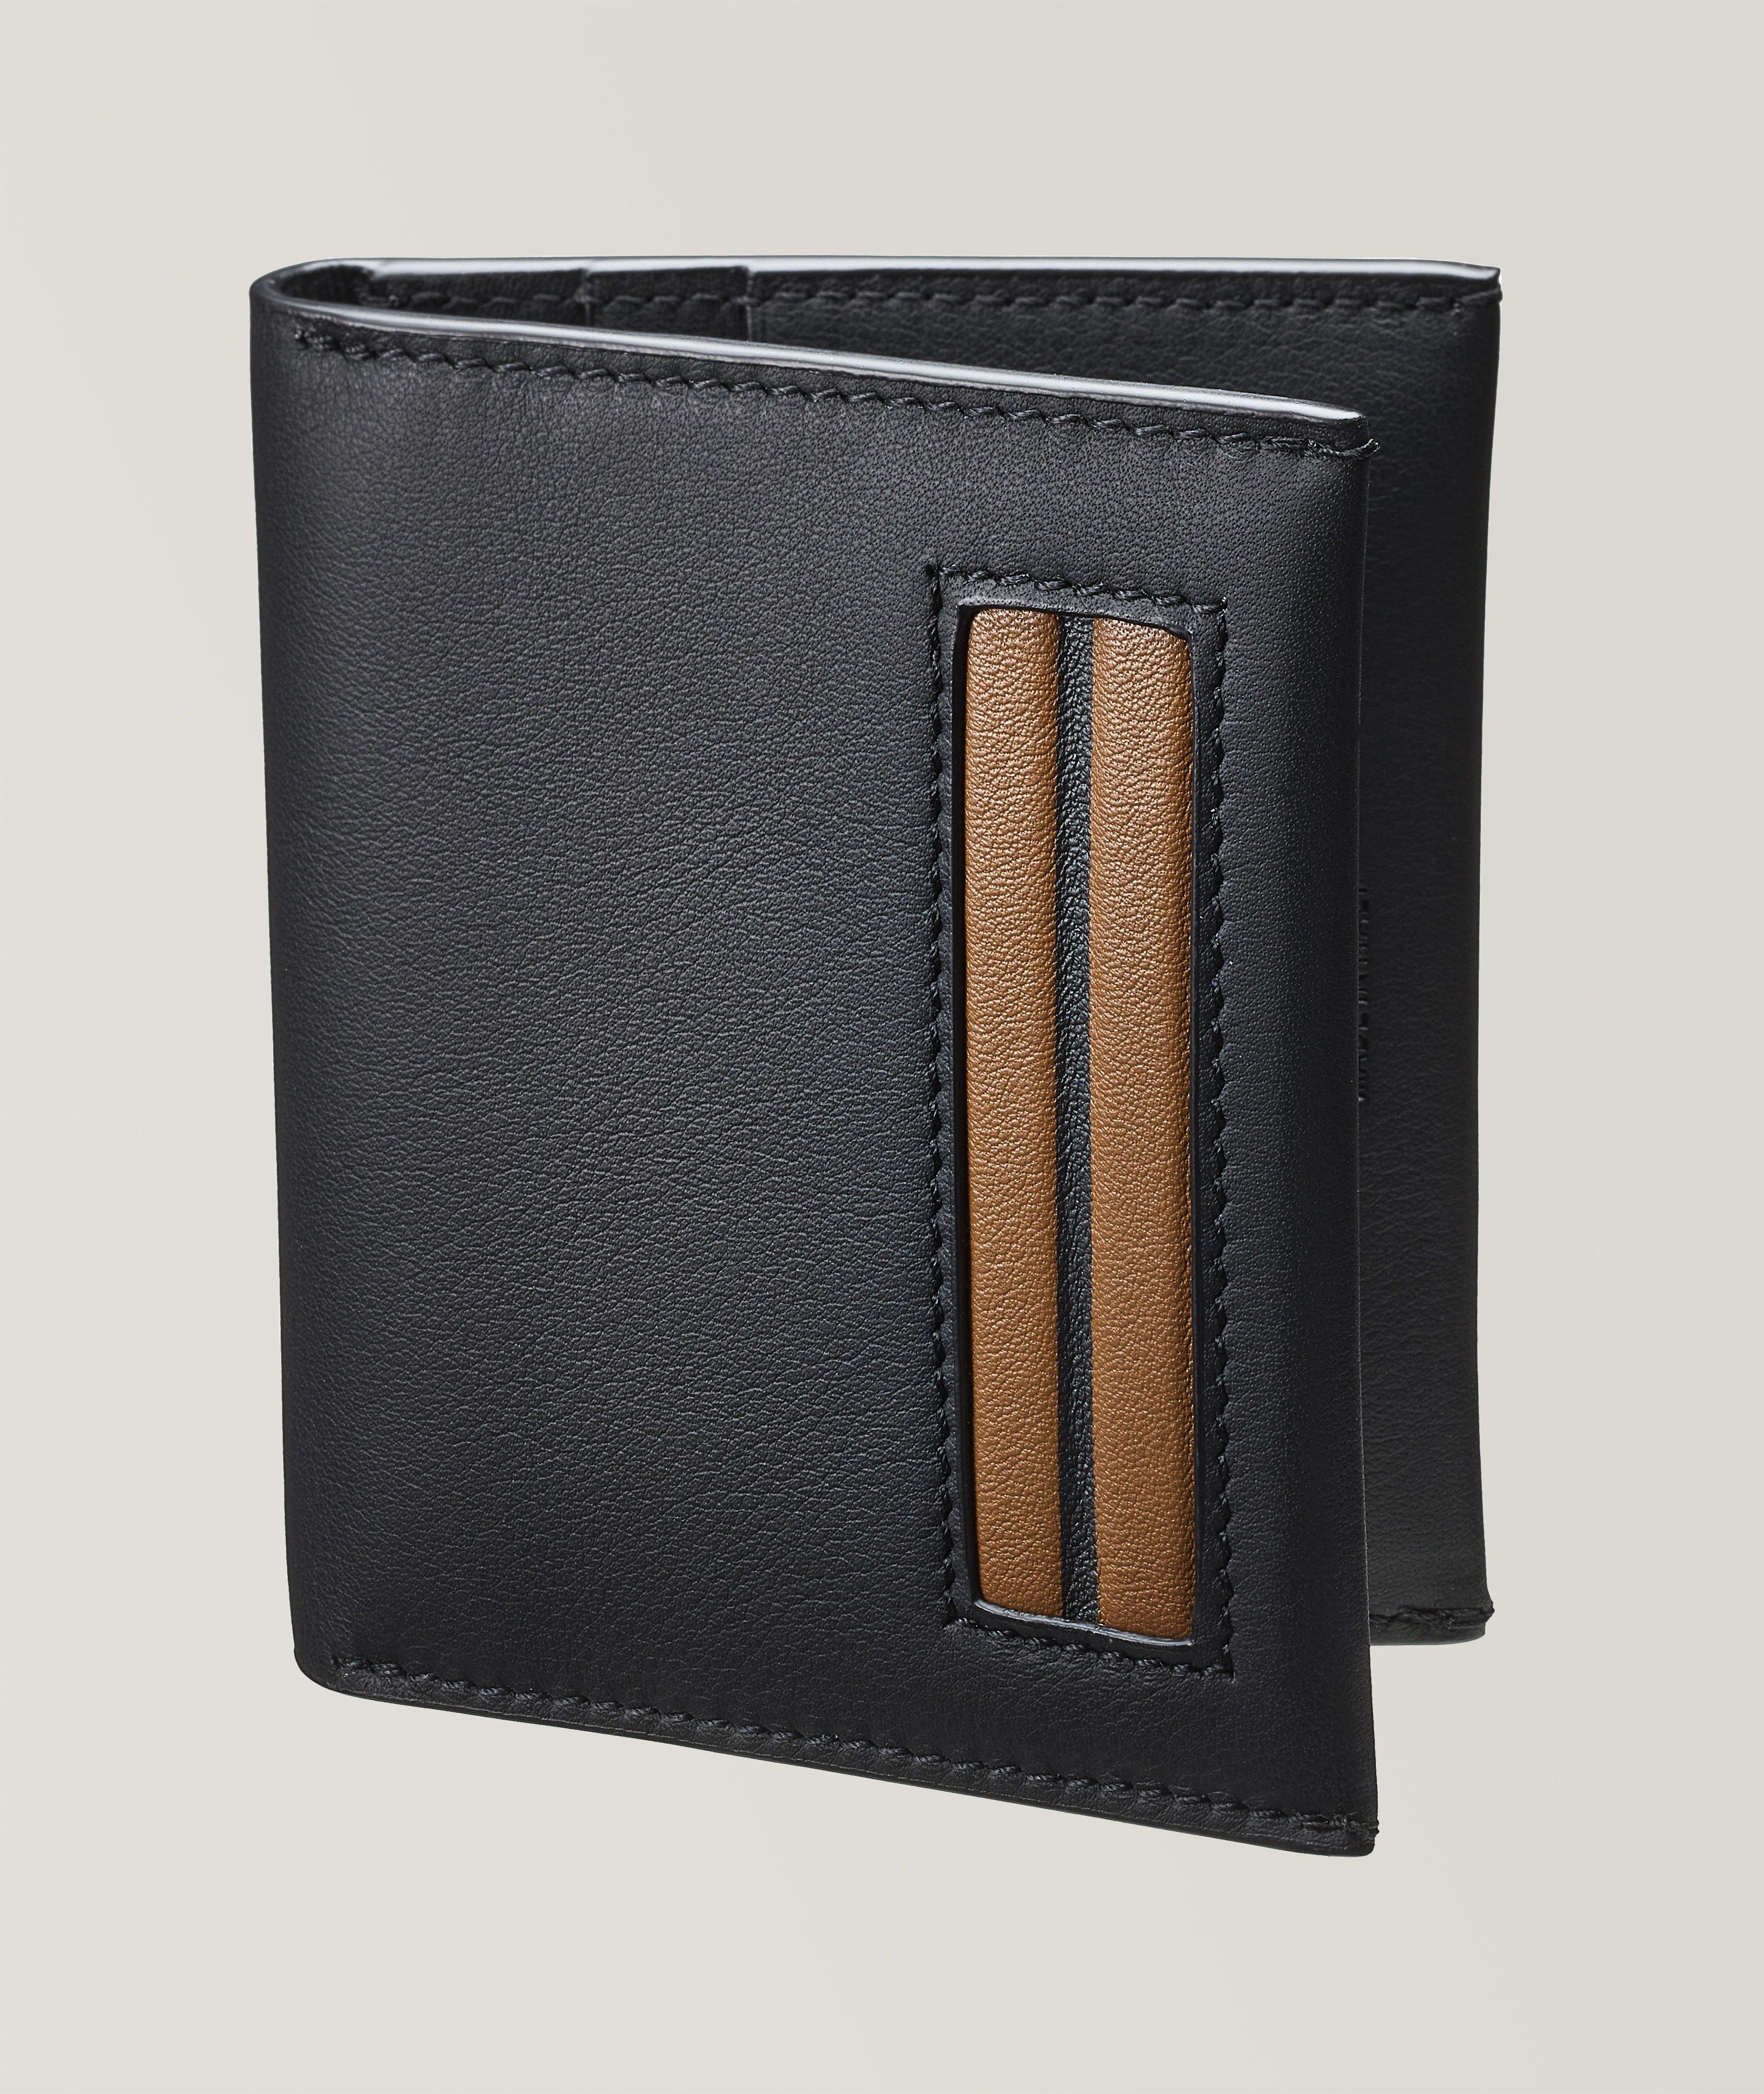 Signifier Leather Folding Card Case image 0